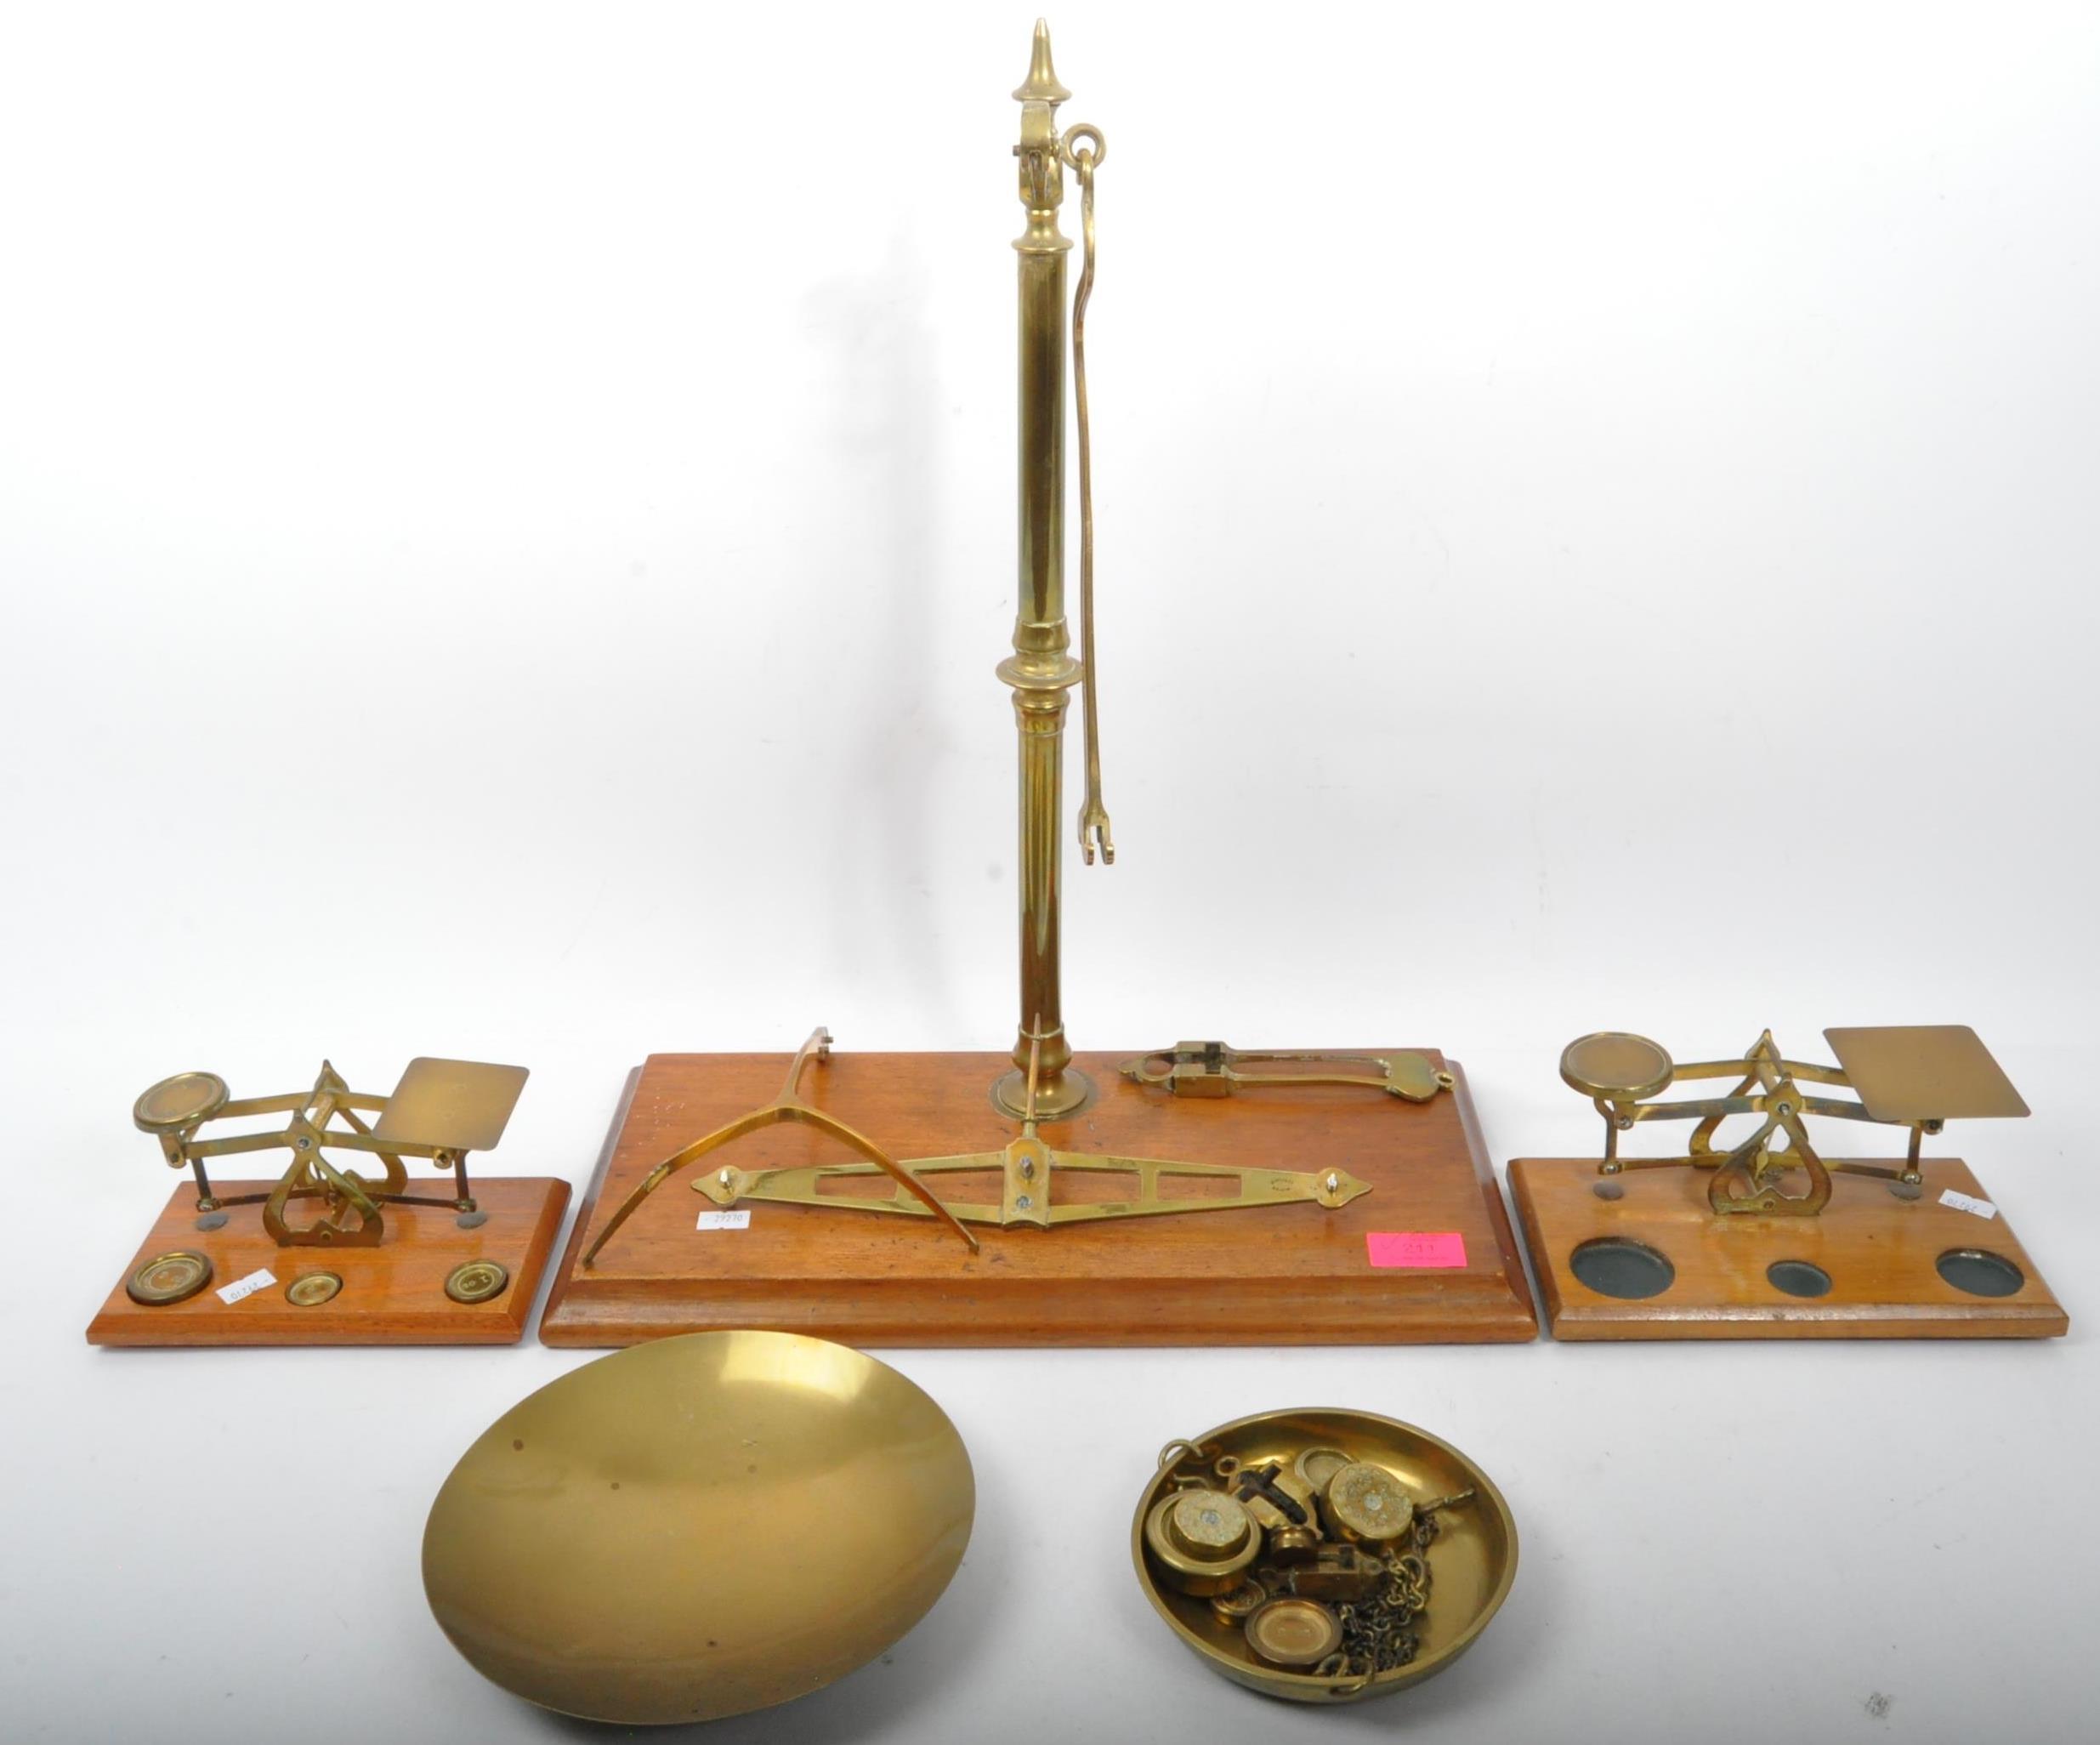 COLLECTION OF THREE VINTAGE BRASS POSTAL SCALES